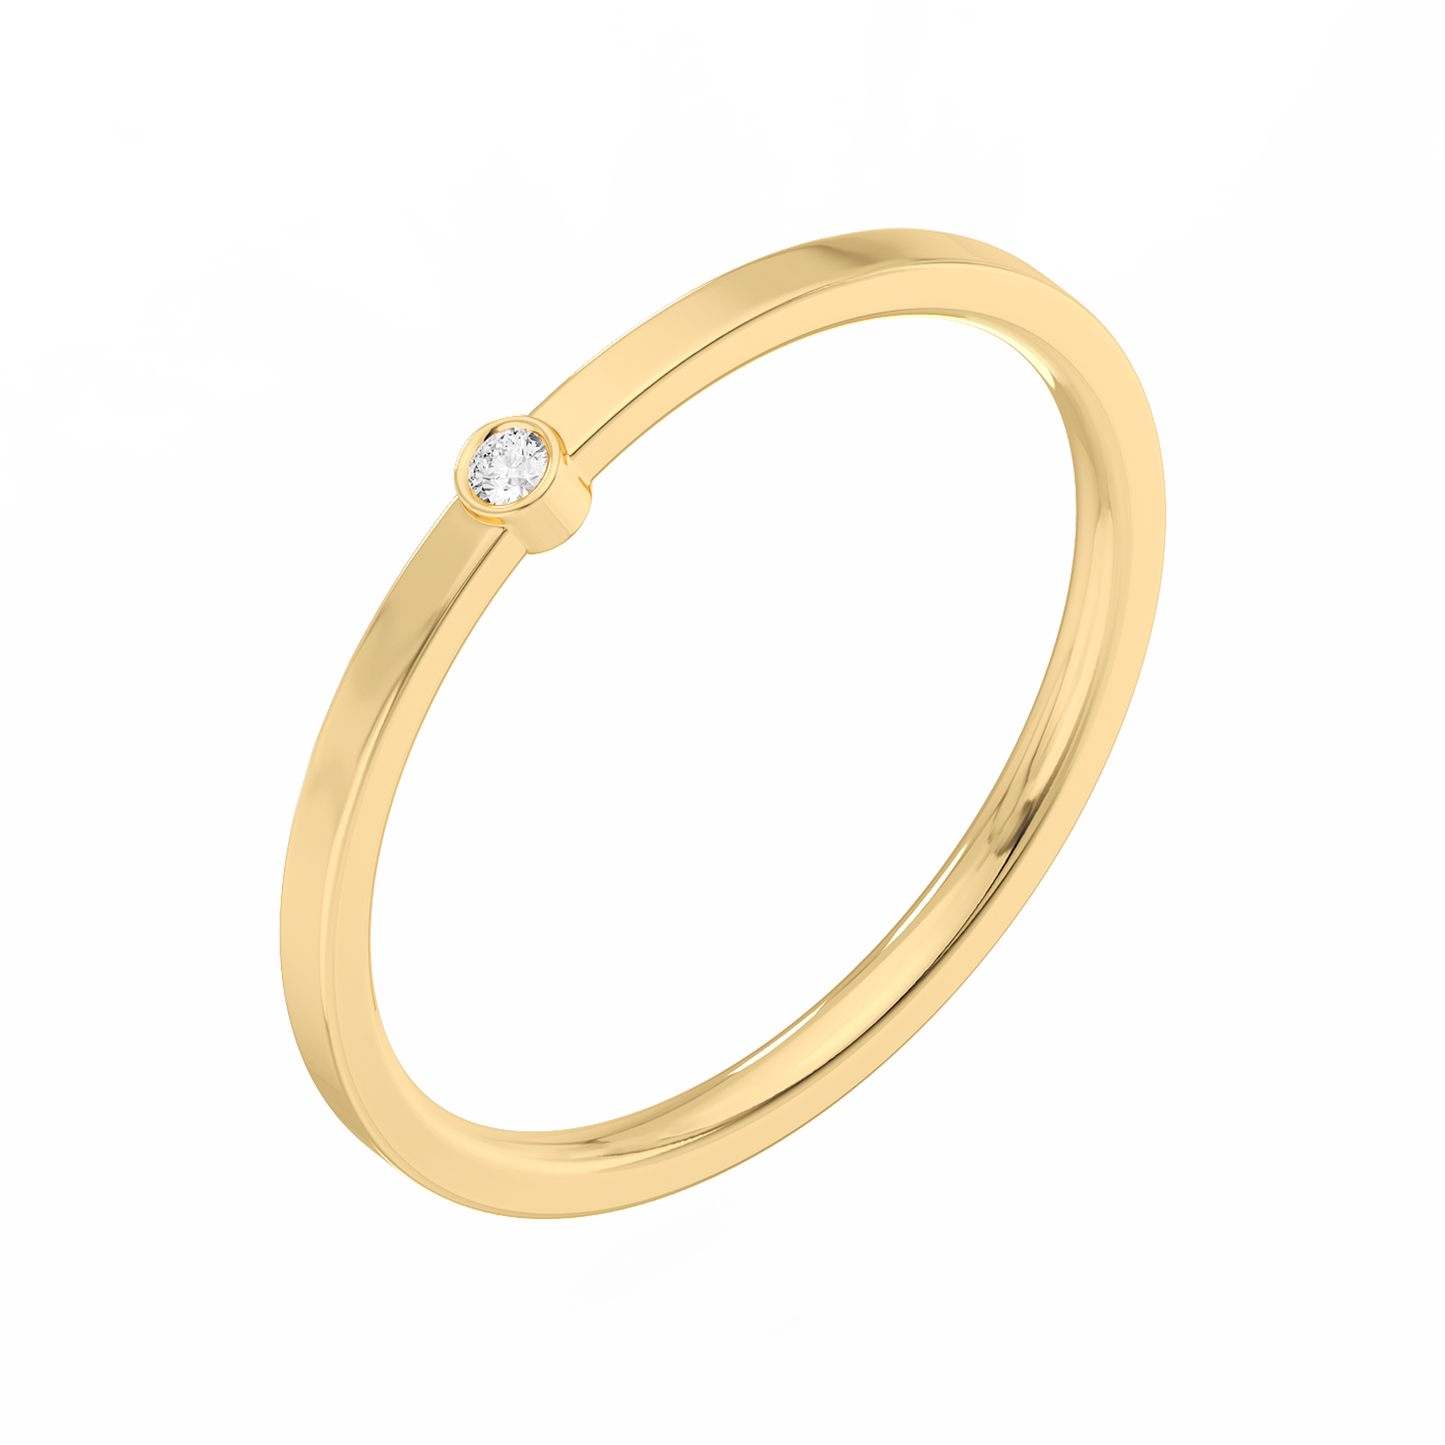 Lab-grown Diamond Solitaire Bezel Ring Tiny (0.02 ct.) 14K Yellow Gold